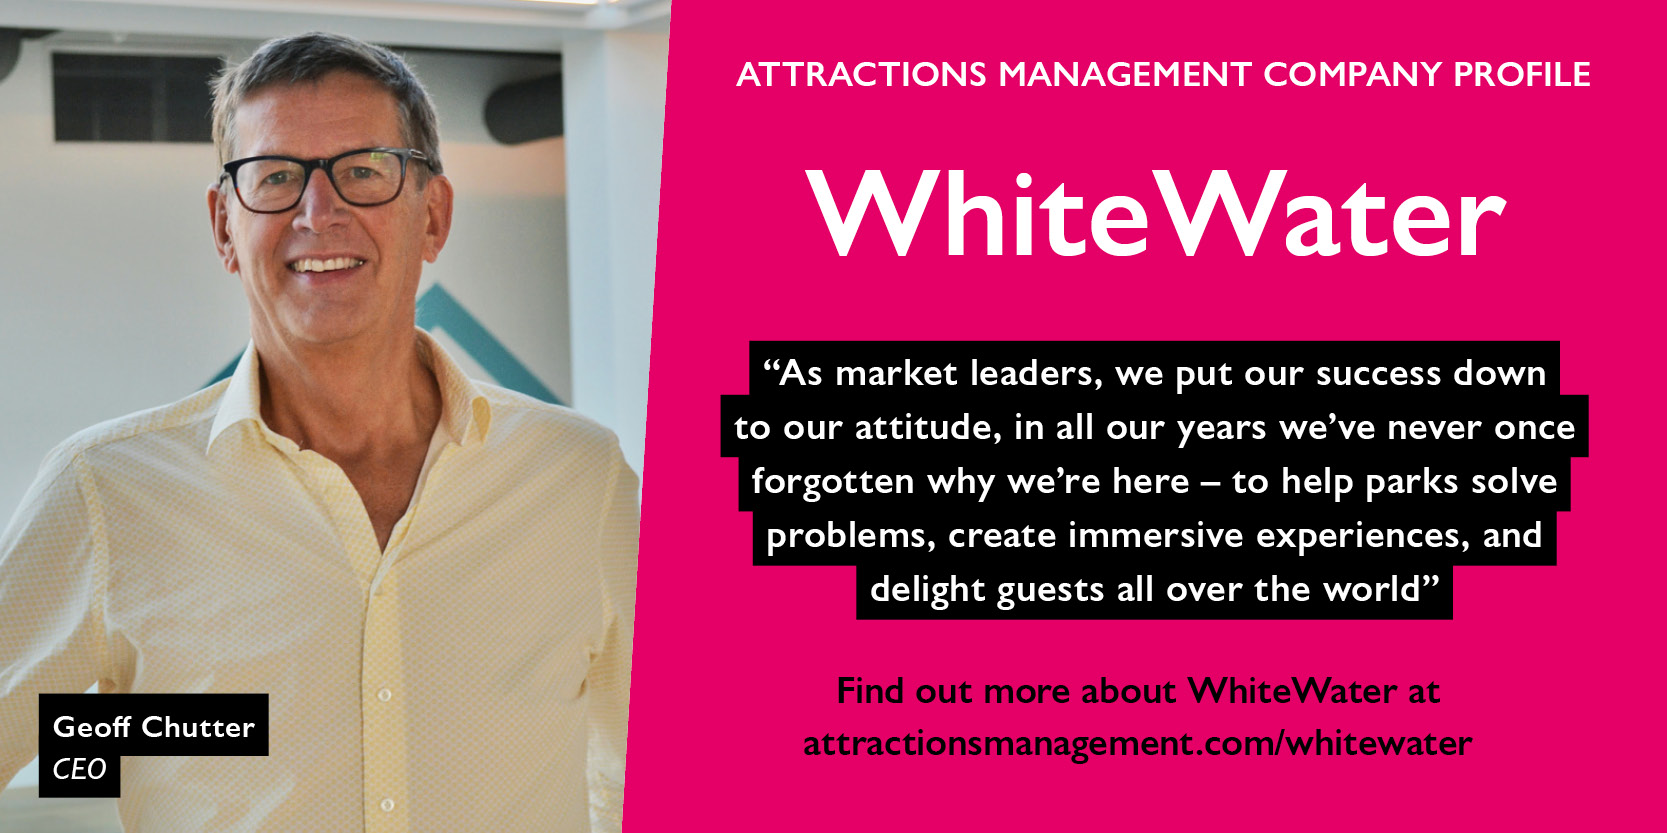 the-only-limit-is-your-imagination-attractionsmanagement